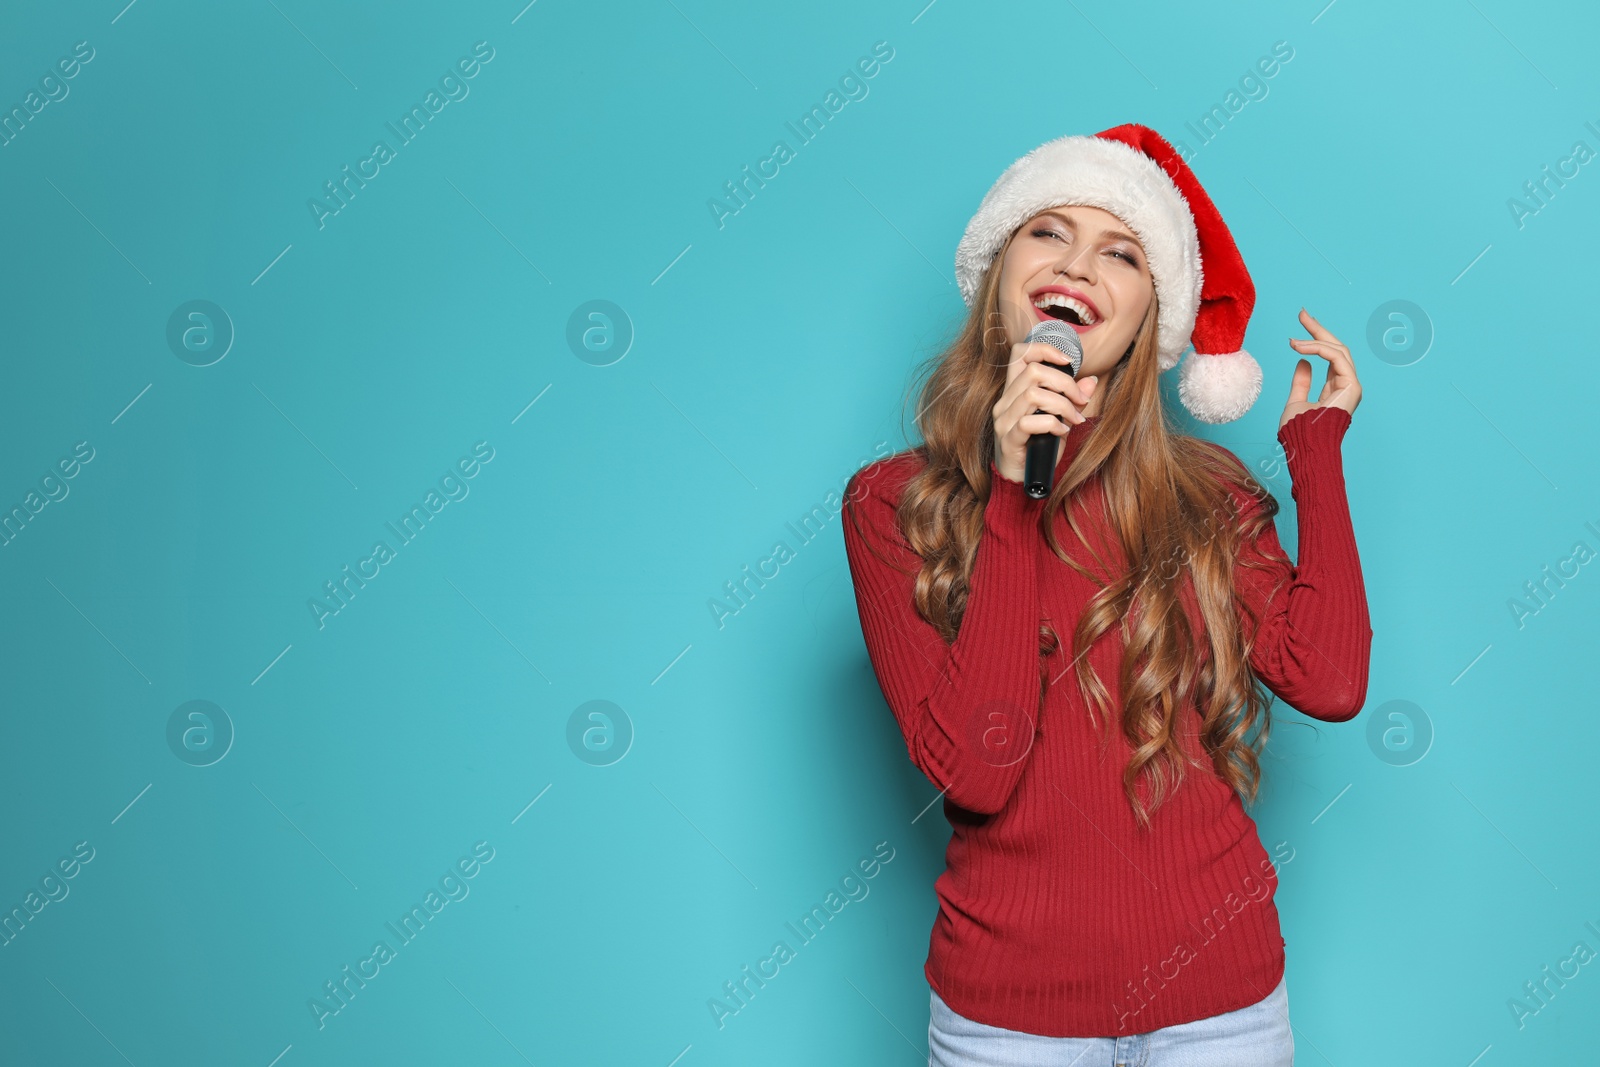 Photo of Young woman in Santa hat singing into microphone on color background. Christmas music